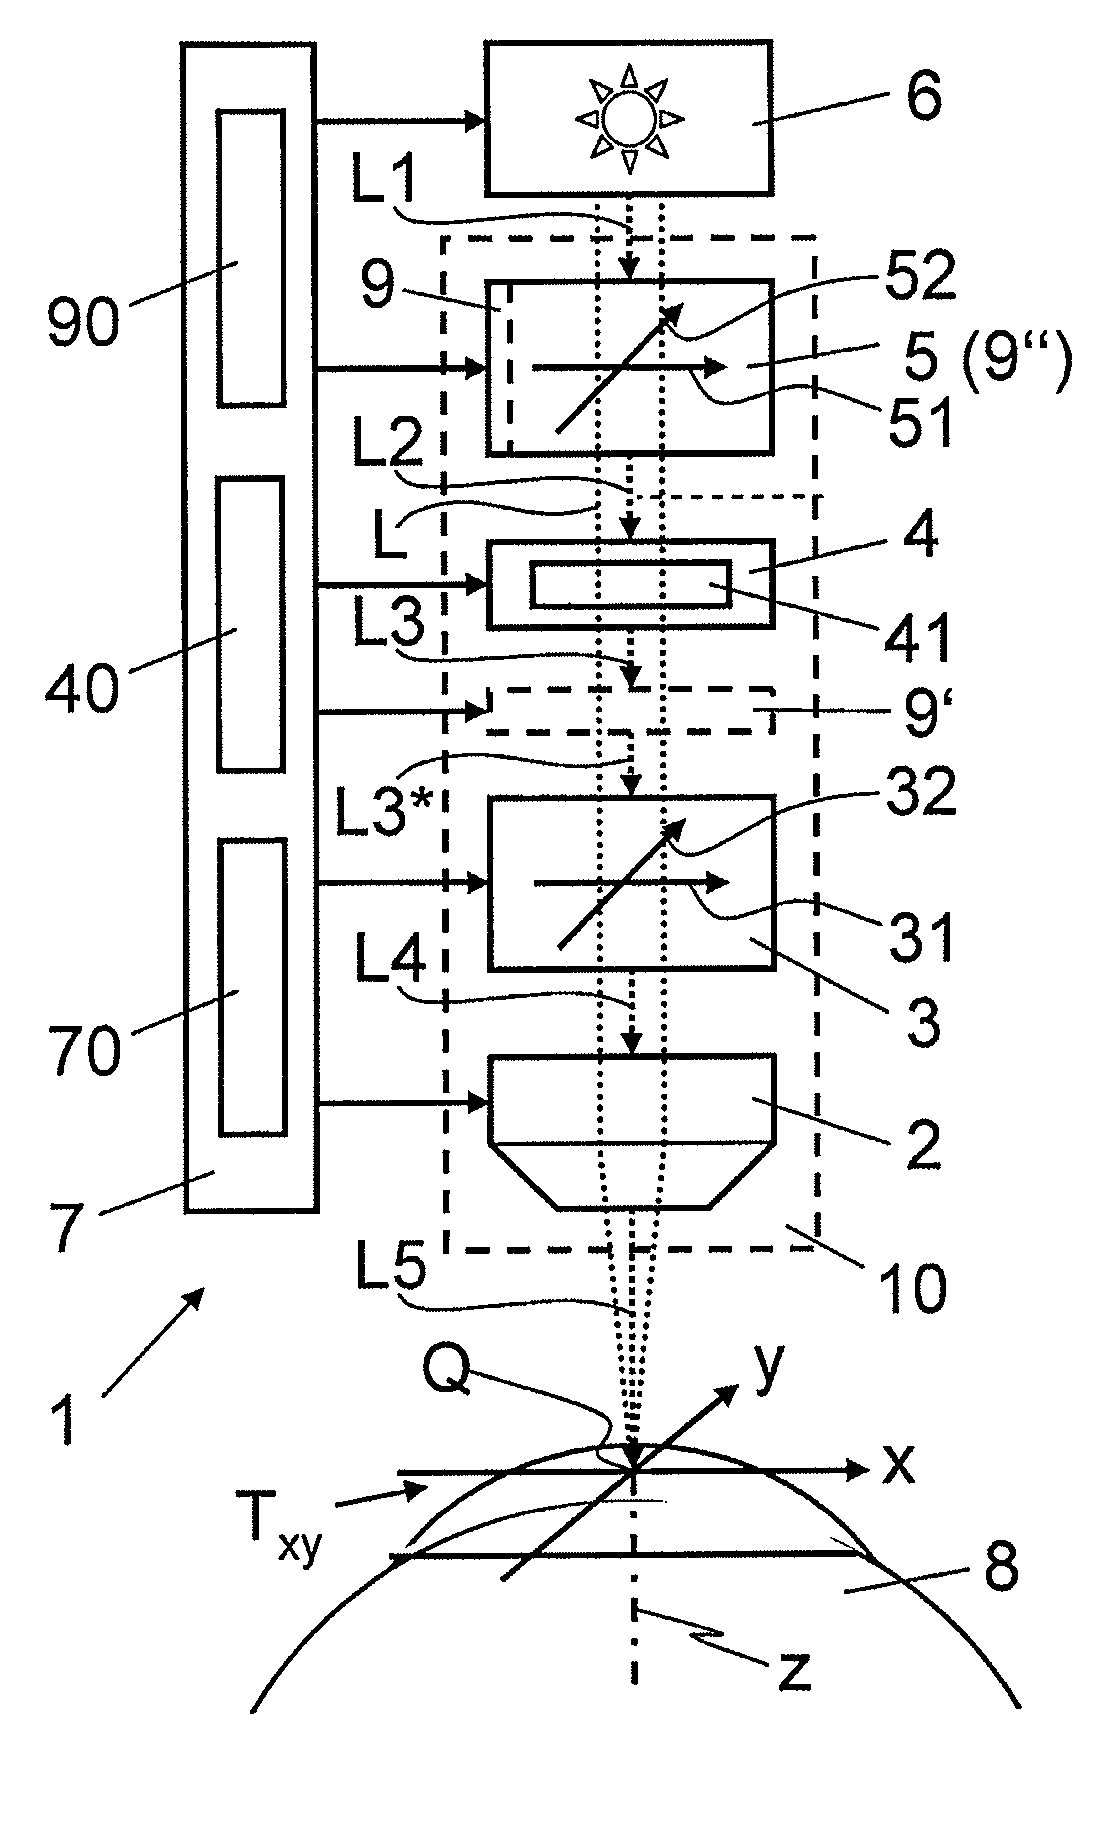 Device for processing eye tissue by a means of femtosecond laser pulses